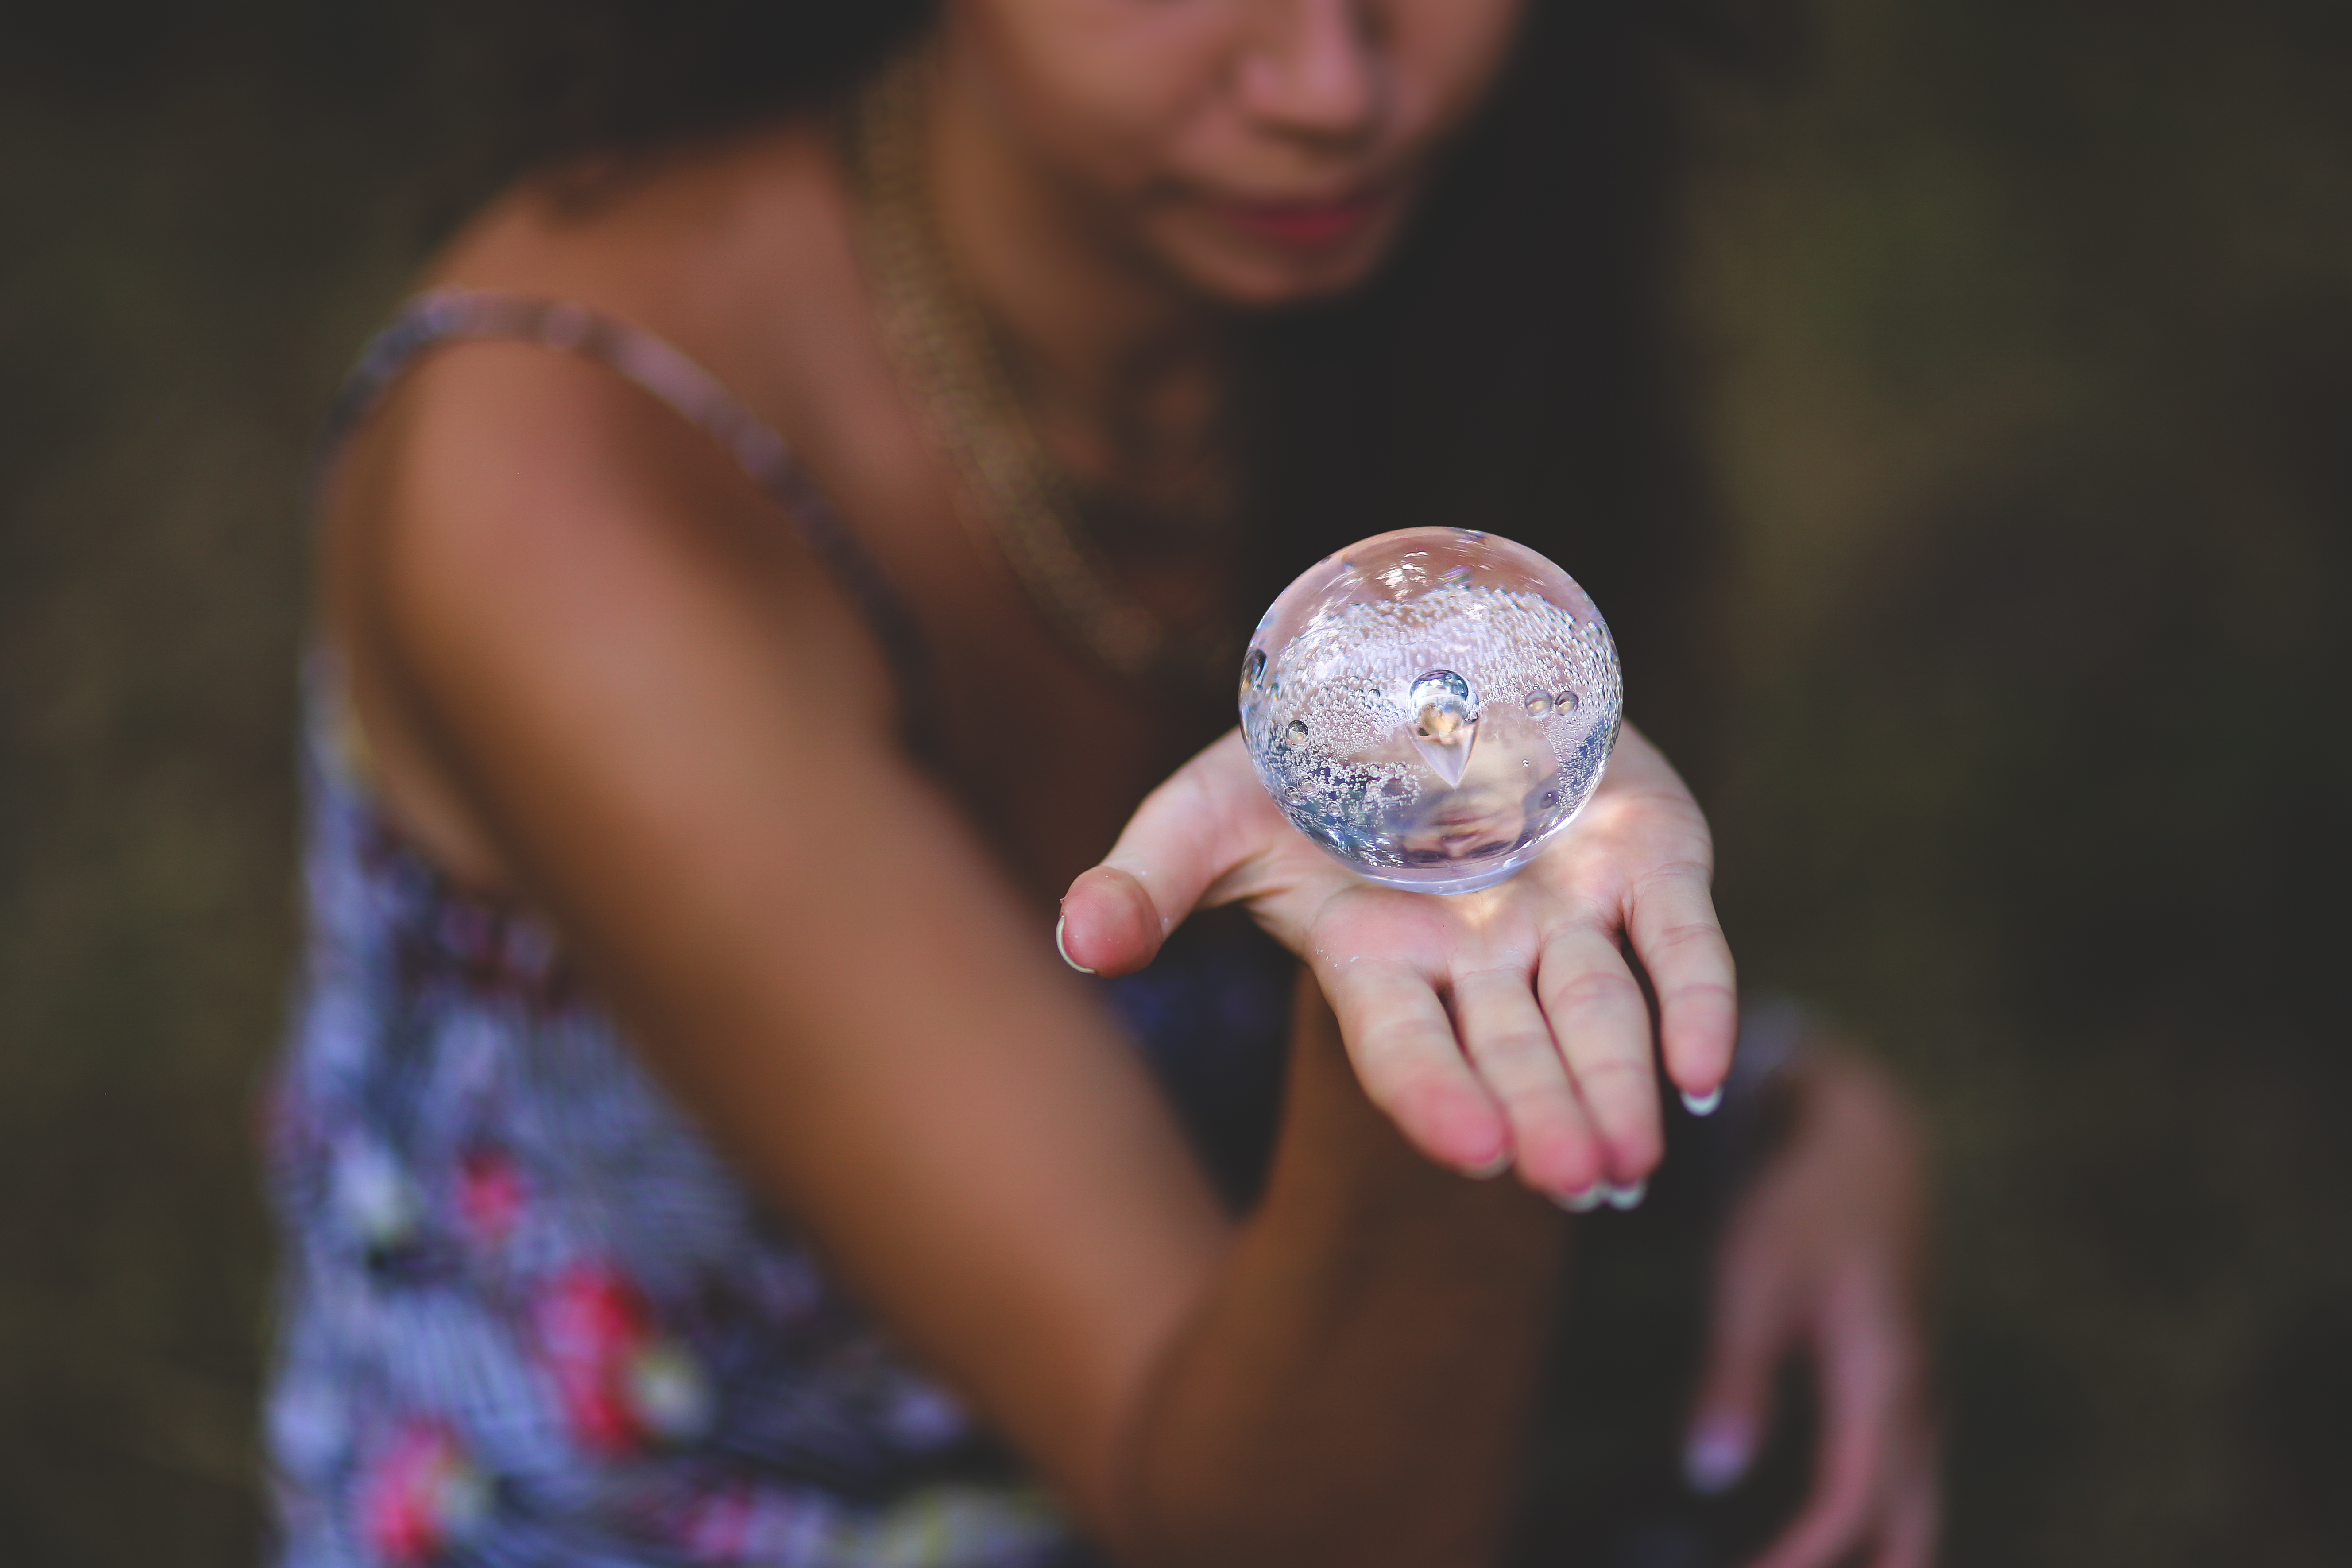 A woman of color holds a circular glass object in her opened left palm.